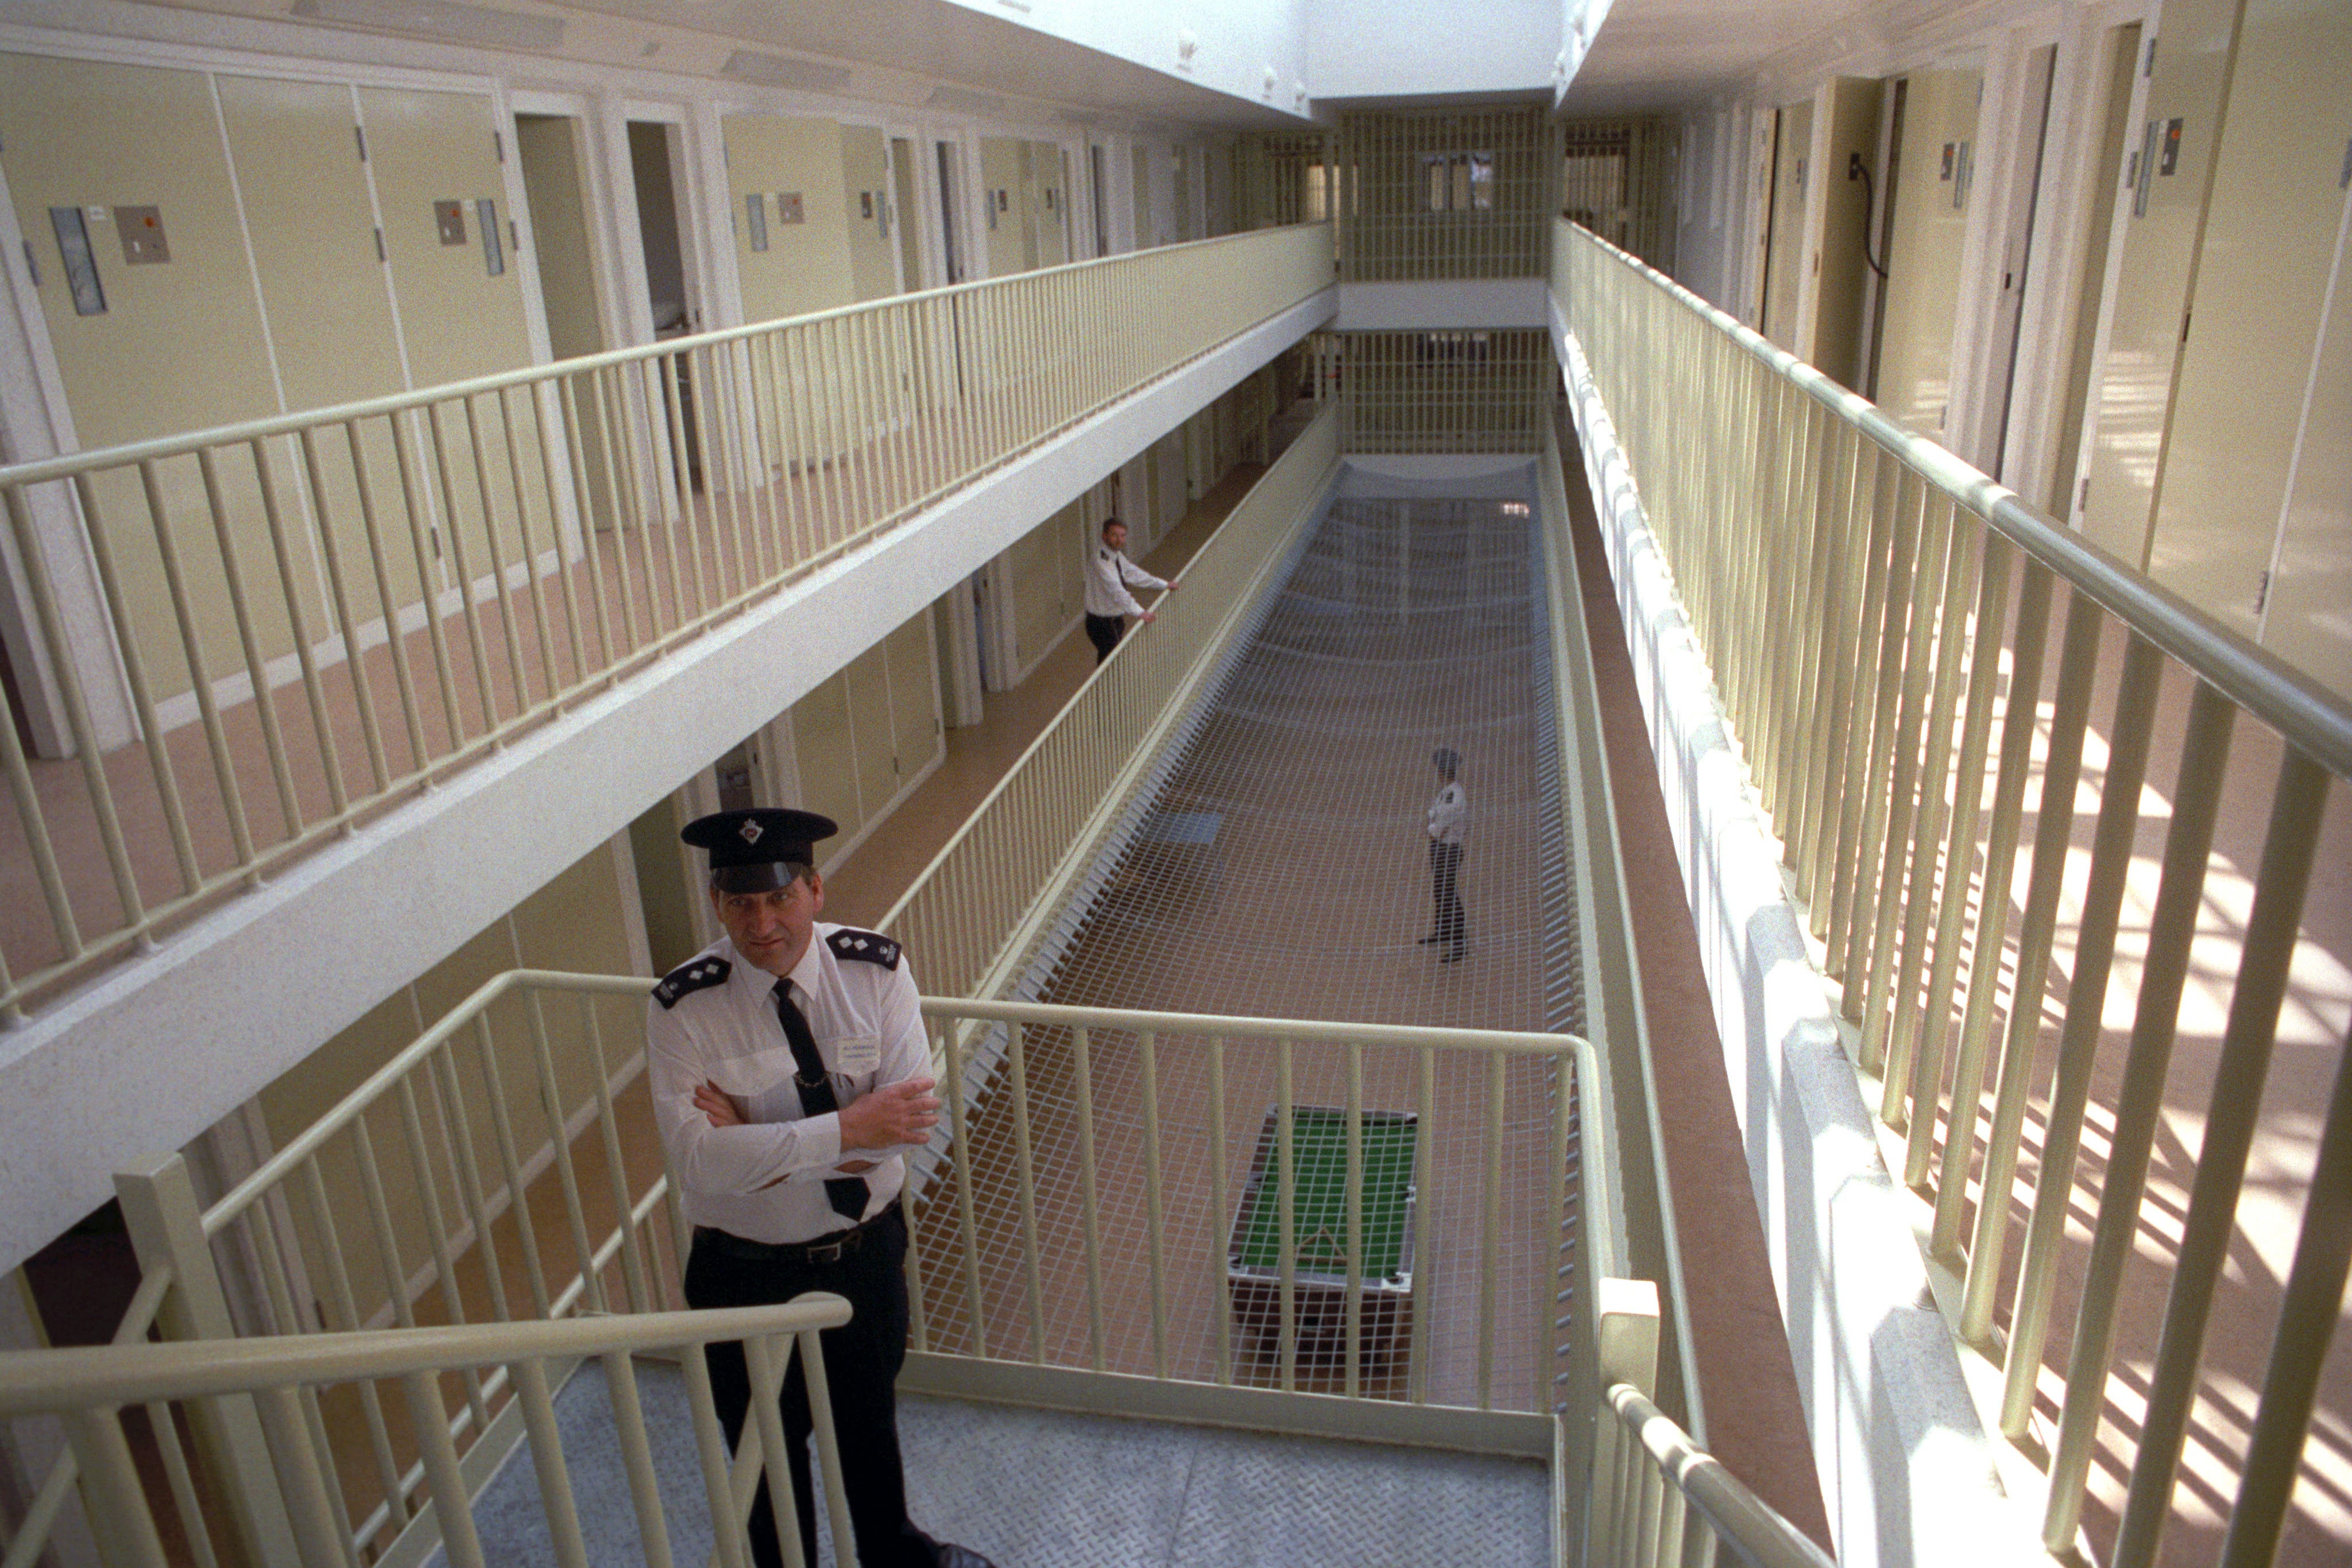 Prisons are being used as ‘a lender of last resort’ for women failed elsewhere in the system, the Prison Governors Association told The Independent